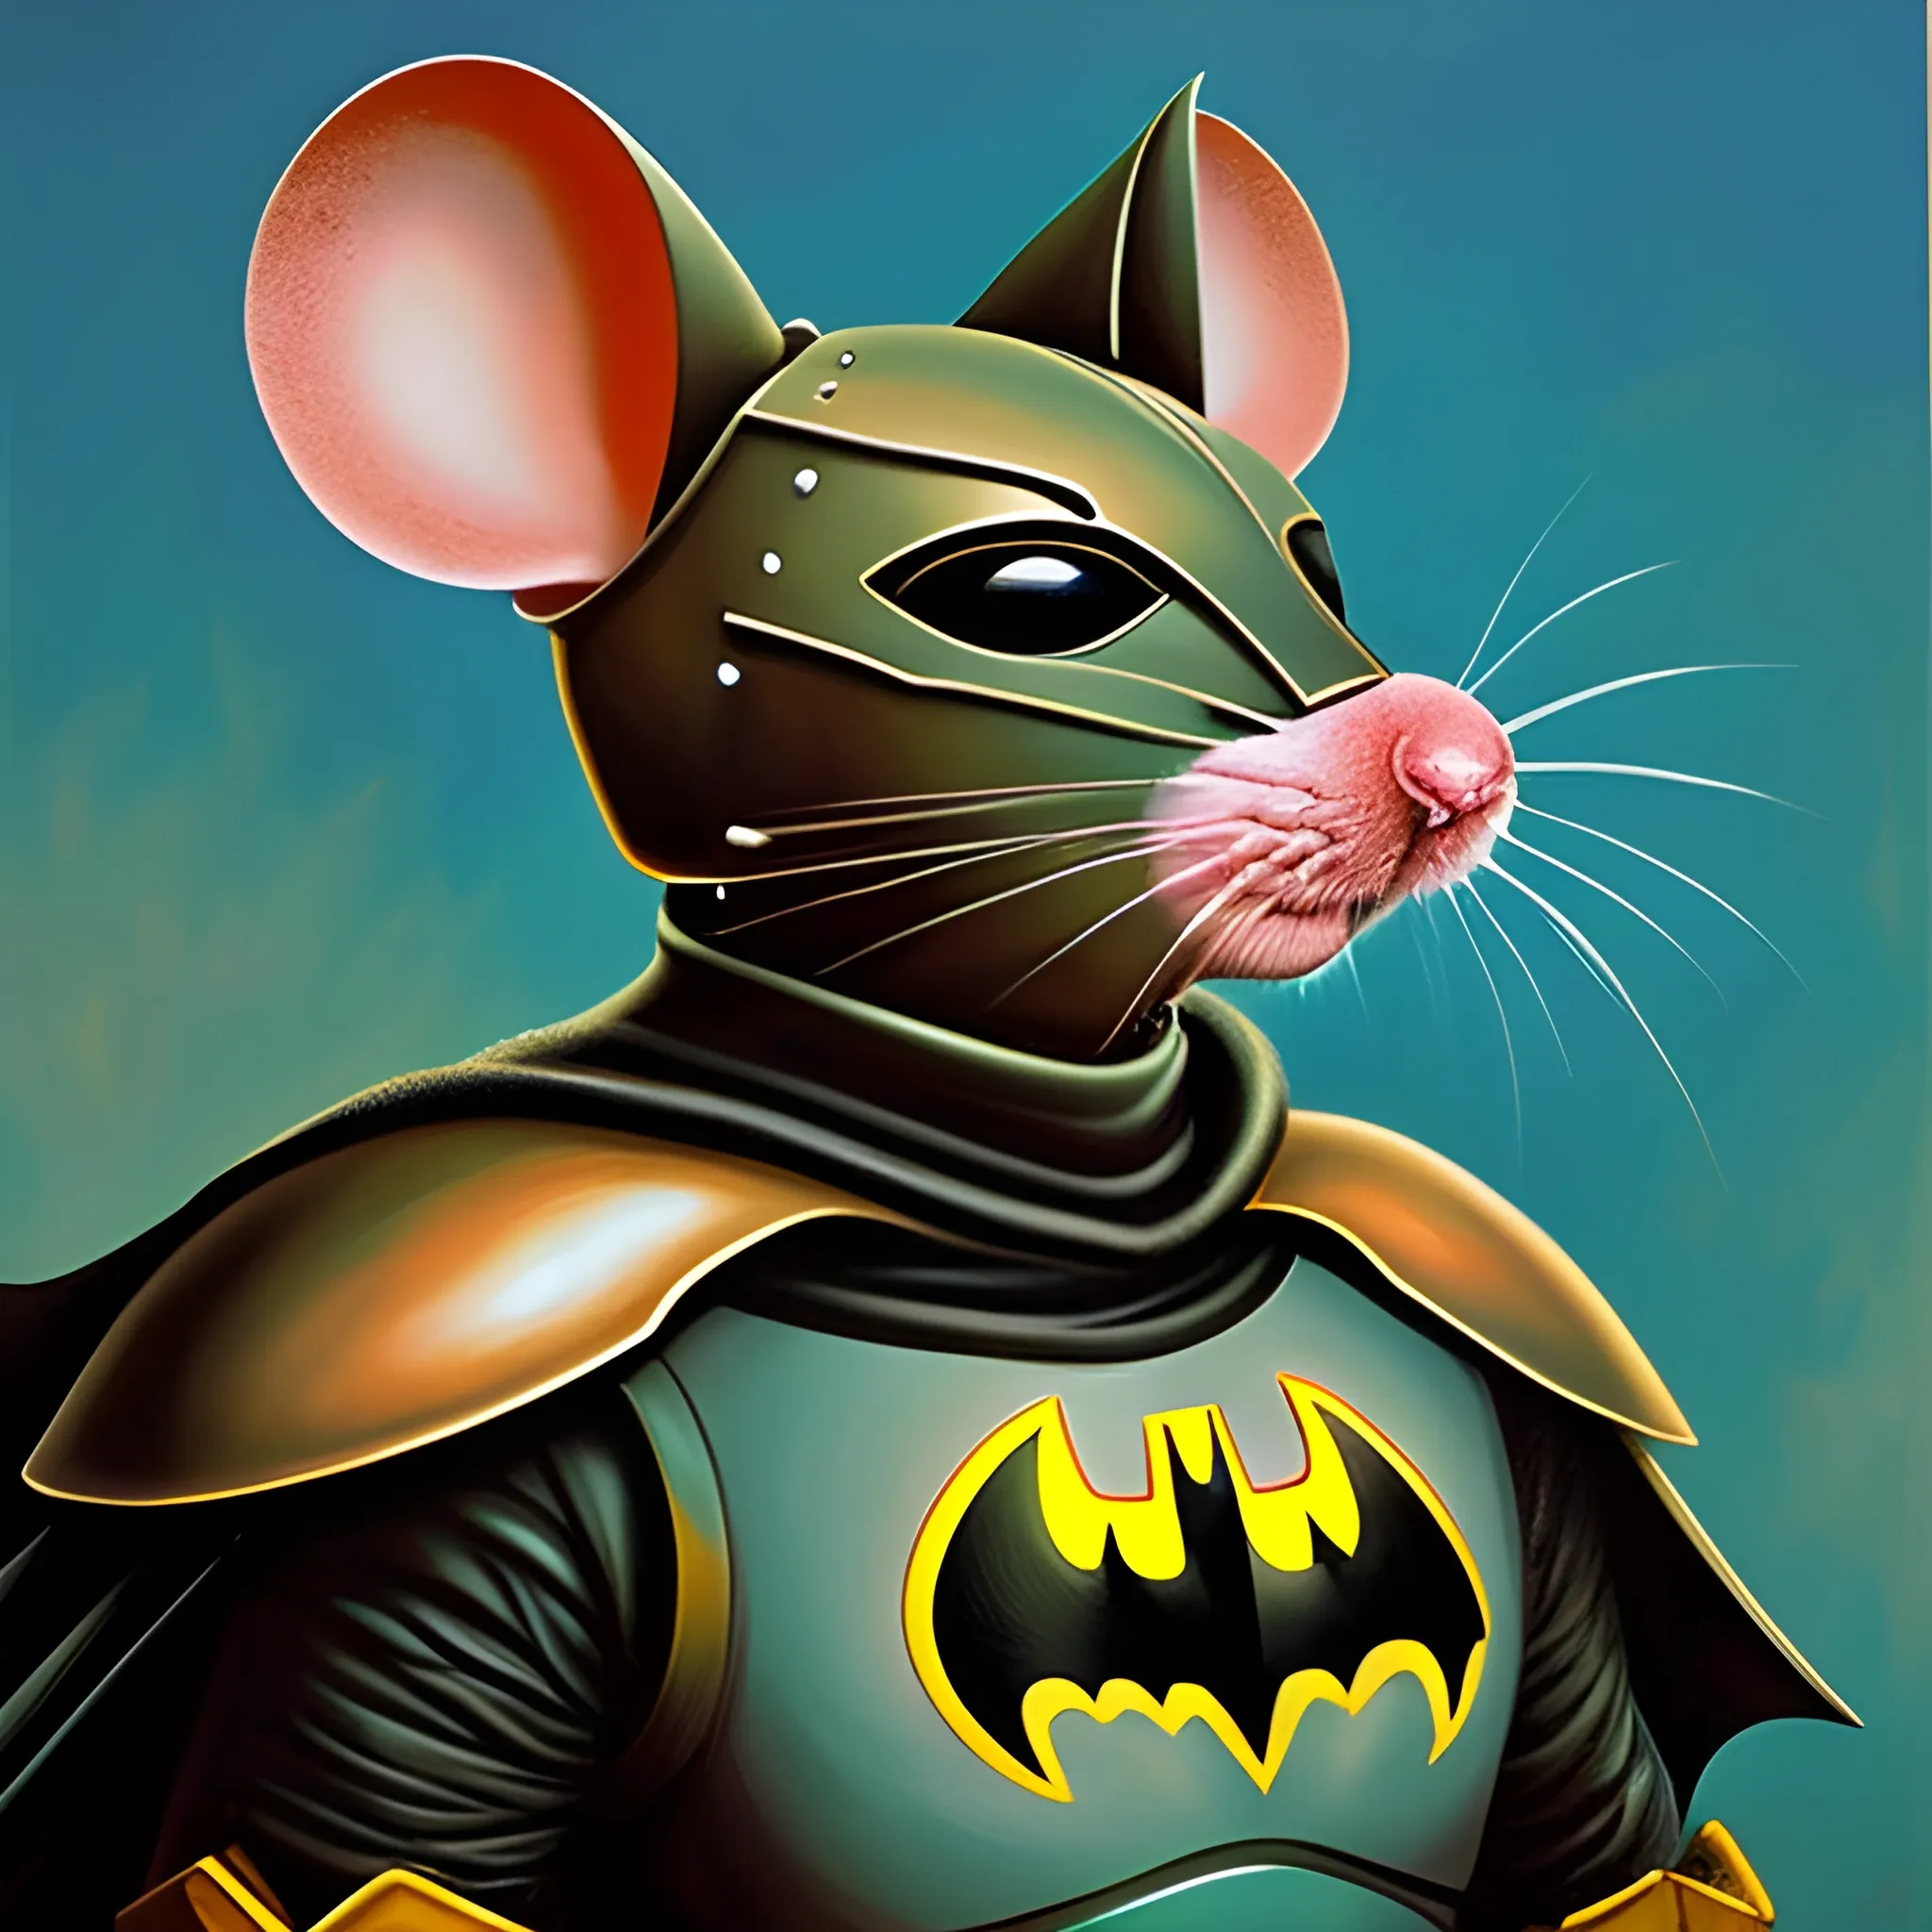 General Mouse is wearing armor. , Oil Painting, Trippy，Just like Batman